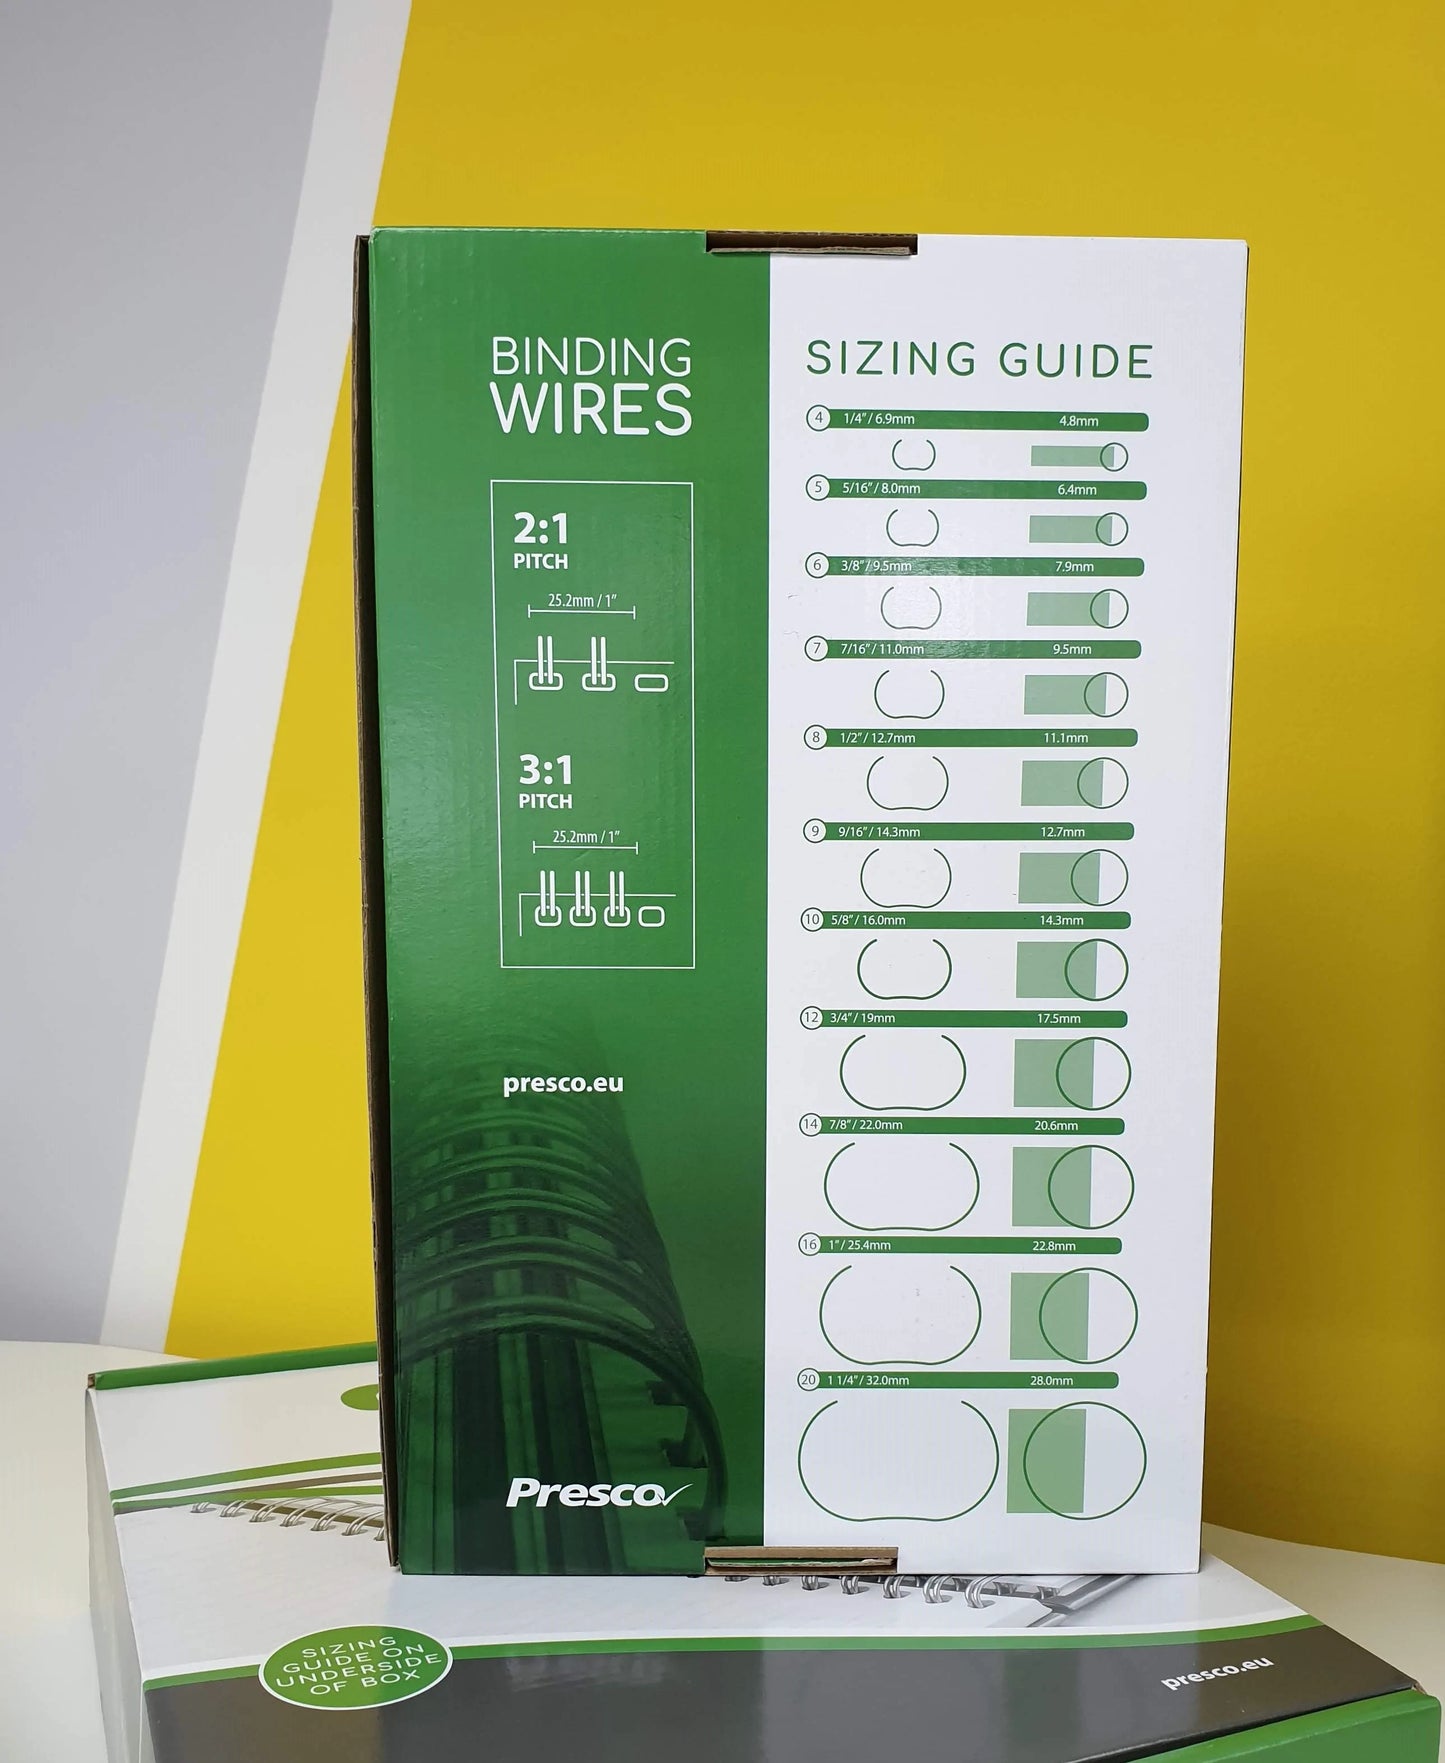 Presco Premium Binding Wires 3:1 Pitch A4 Wiro - 34 Loops